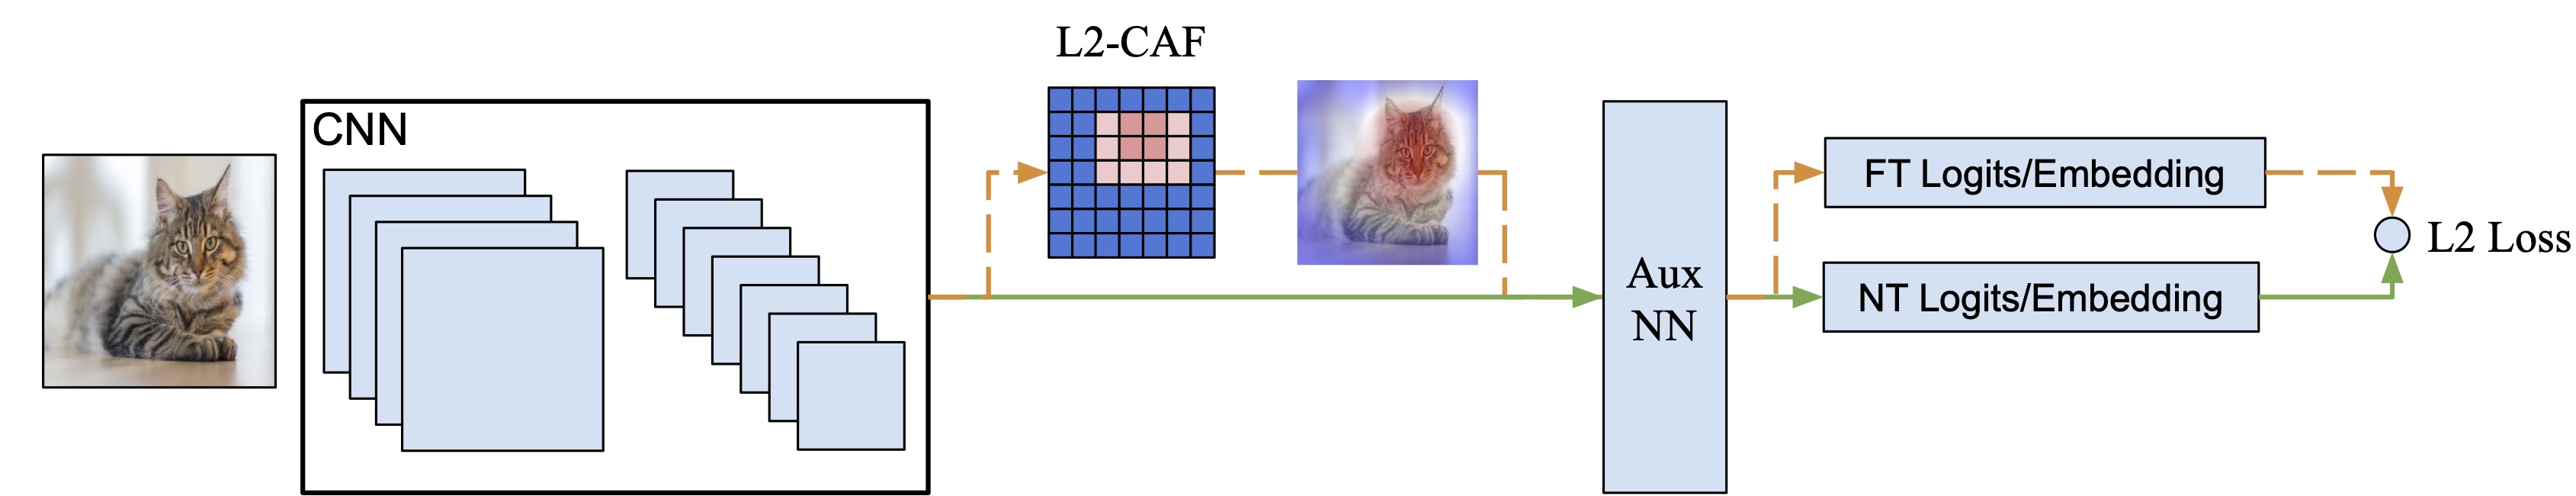  We formulate attention visualization as a constrained optimization problem. We leverage the unit L2-Norm constraint as an attention filter (L2-CAF) to localize attention in both classification and retrieval networks.